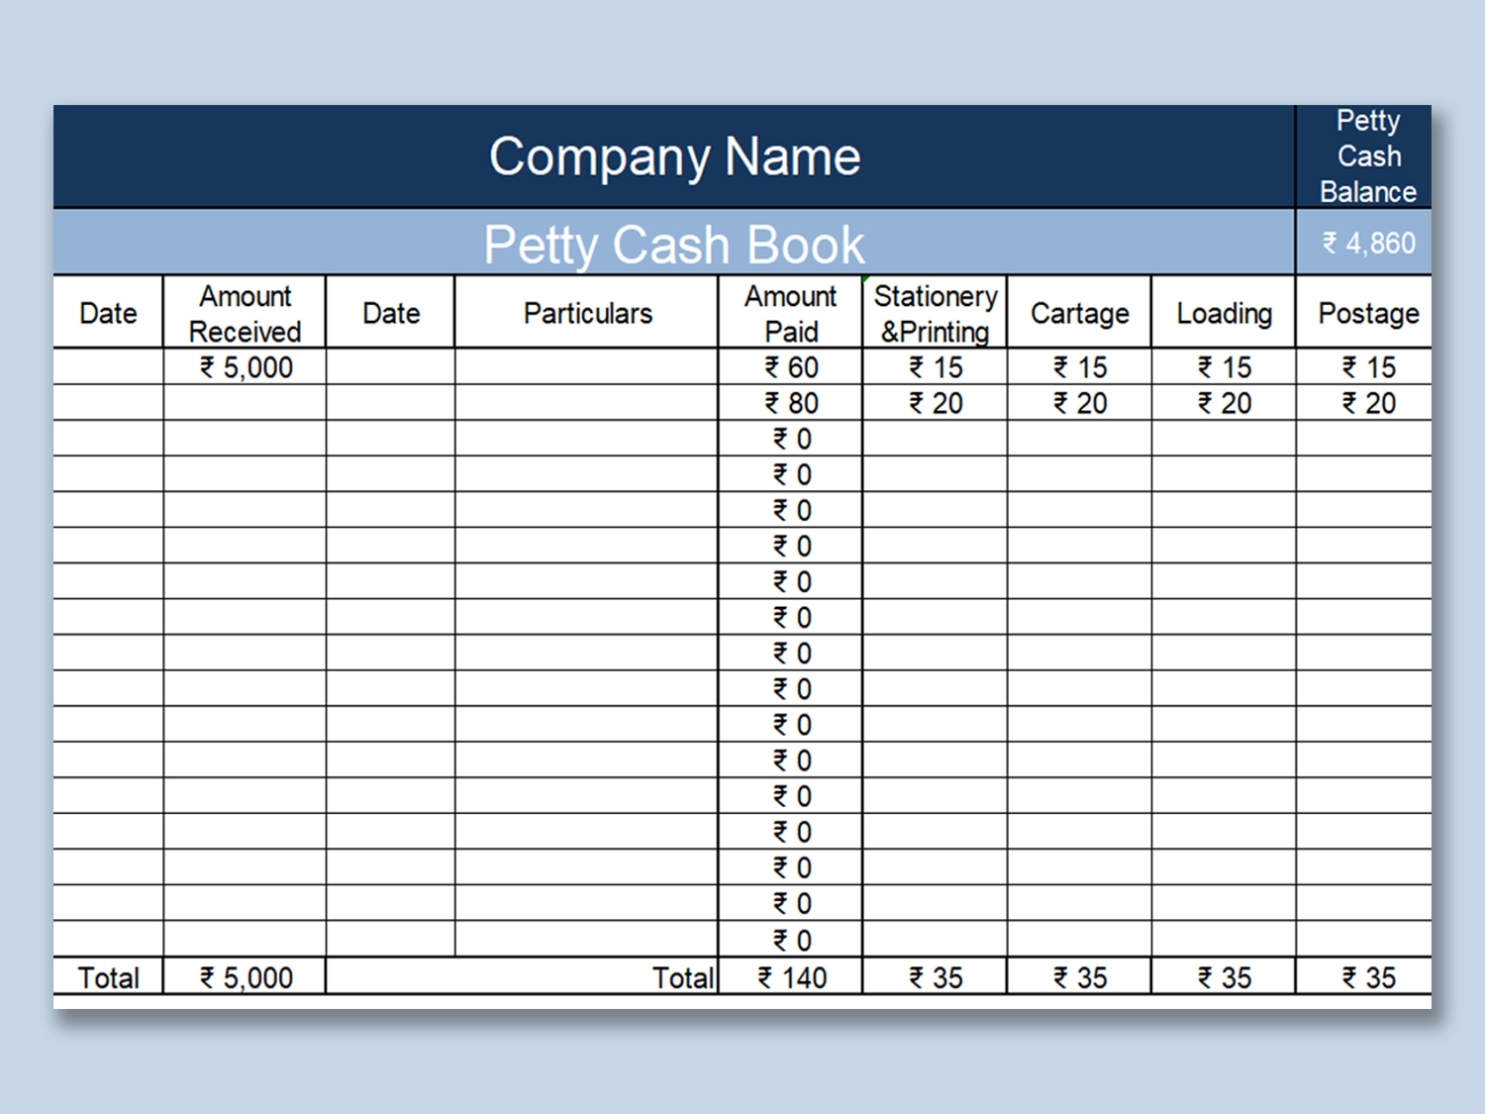 Petty Cash Statement Excel ~ Excel Templates Intended For Petty Cash Expense Report Template